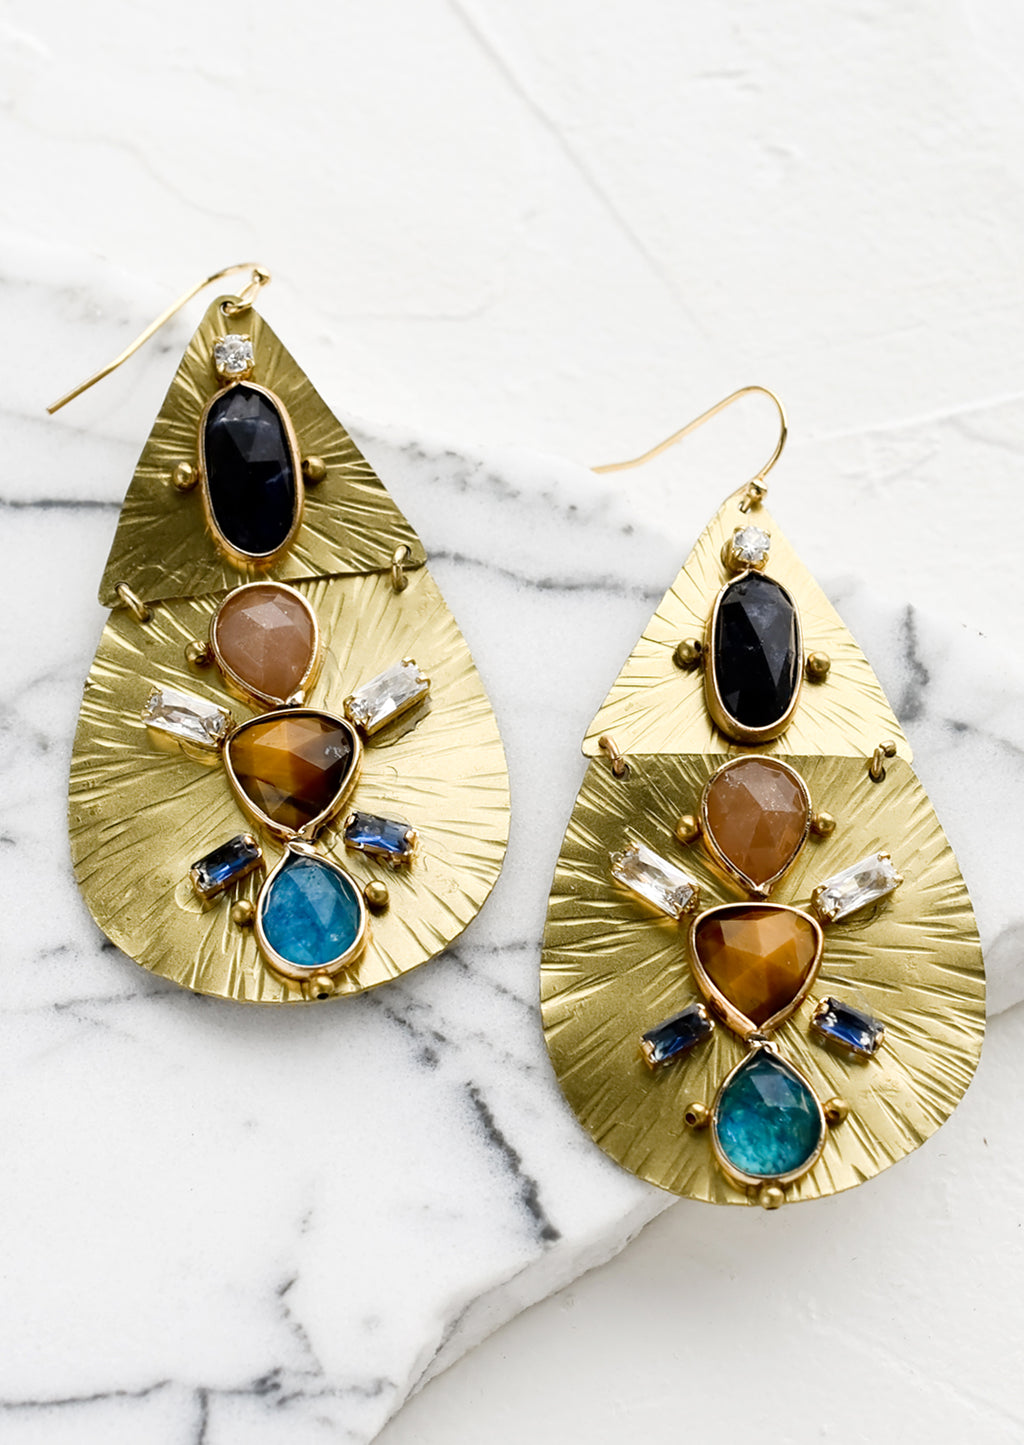 2: A pair of teardrop shaped gold metal earrings with crystal and gemstone embellishment.